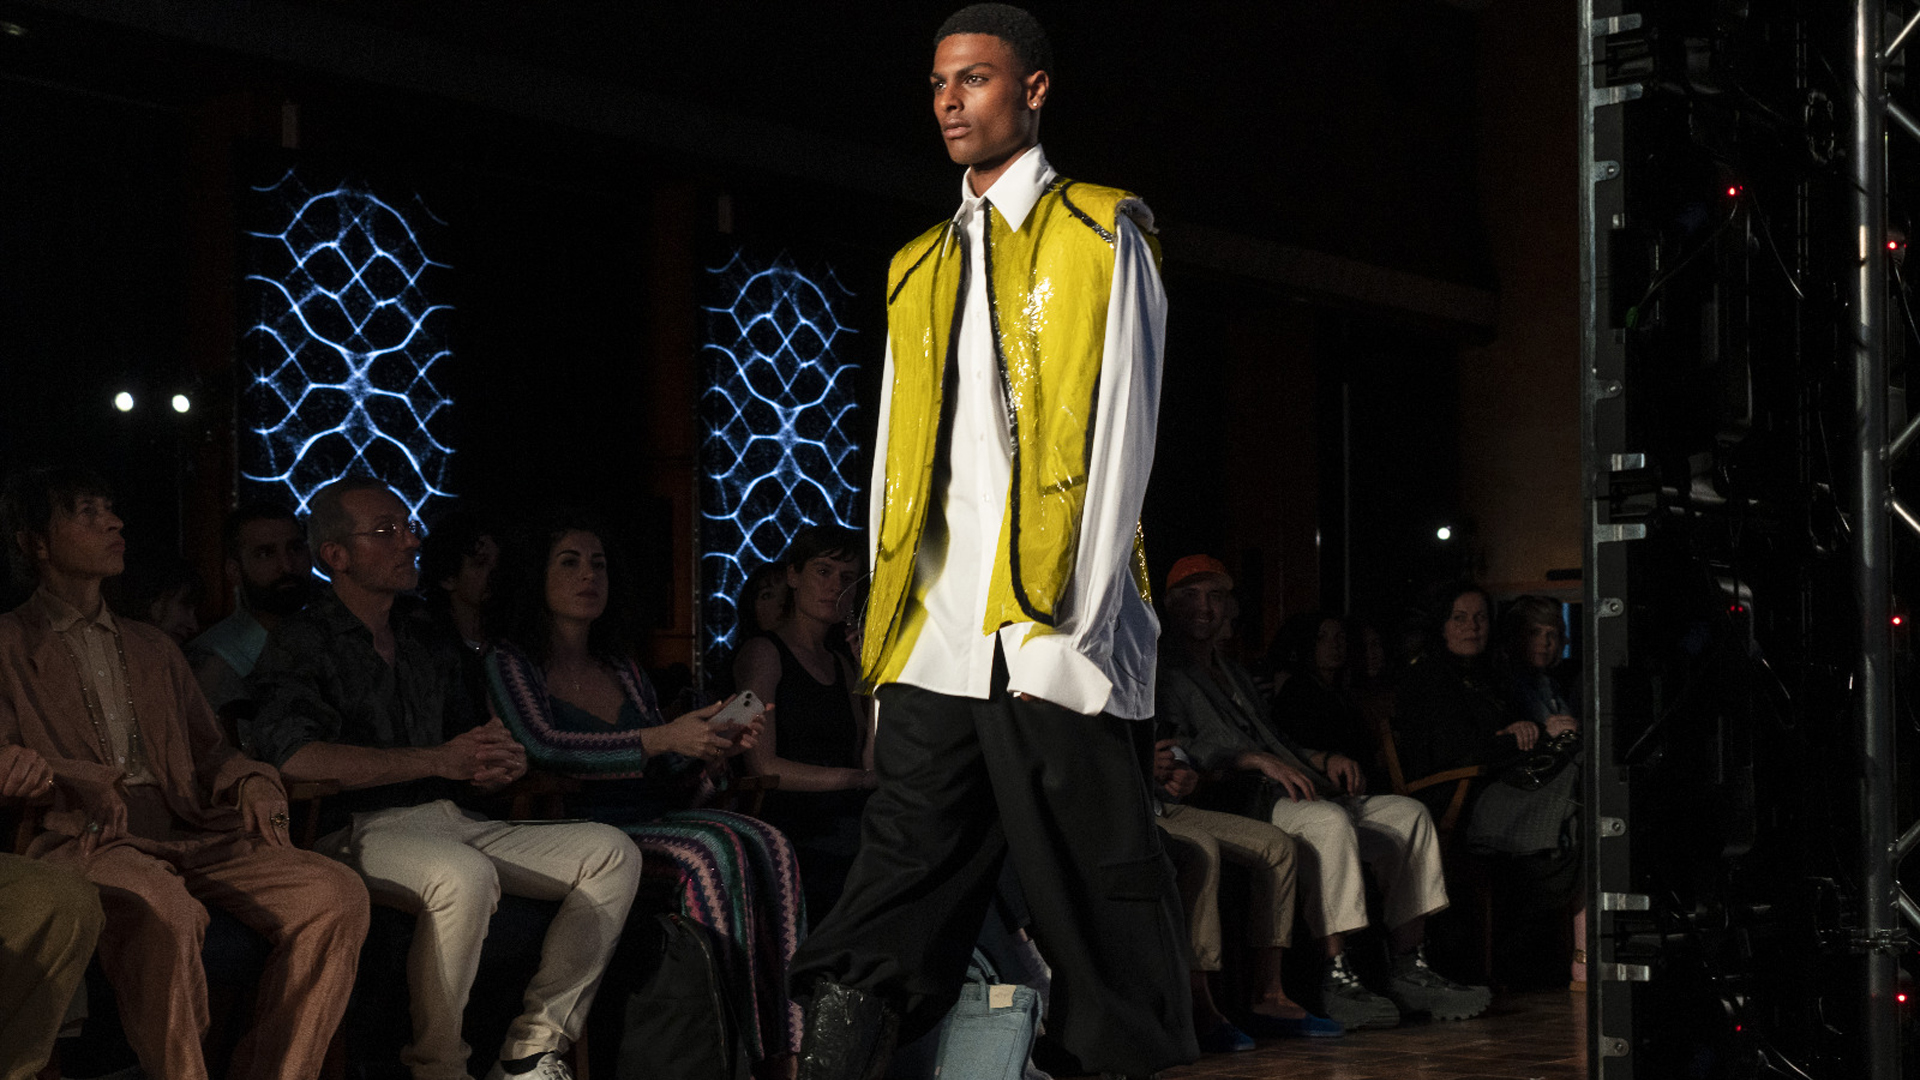 Young guy on catwalk wearing white shirt with yellow jacket